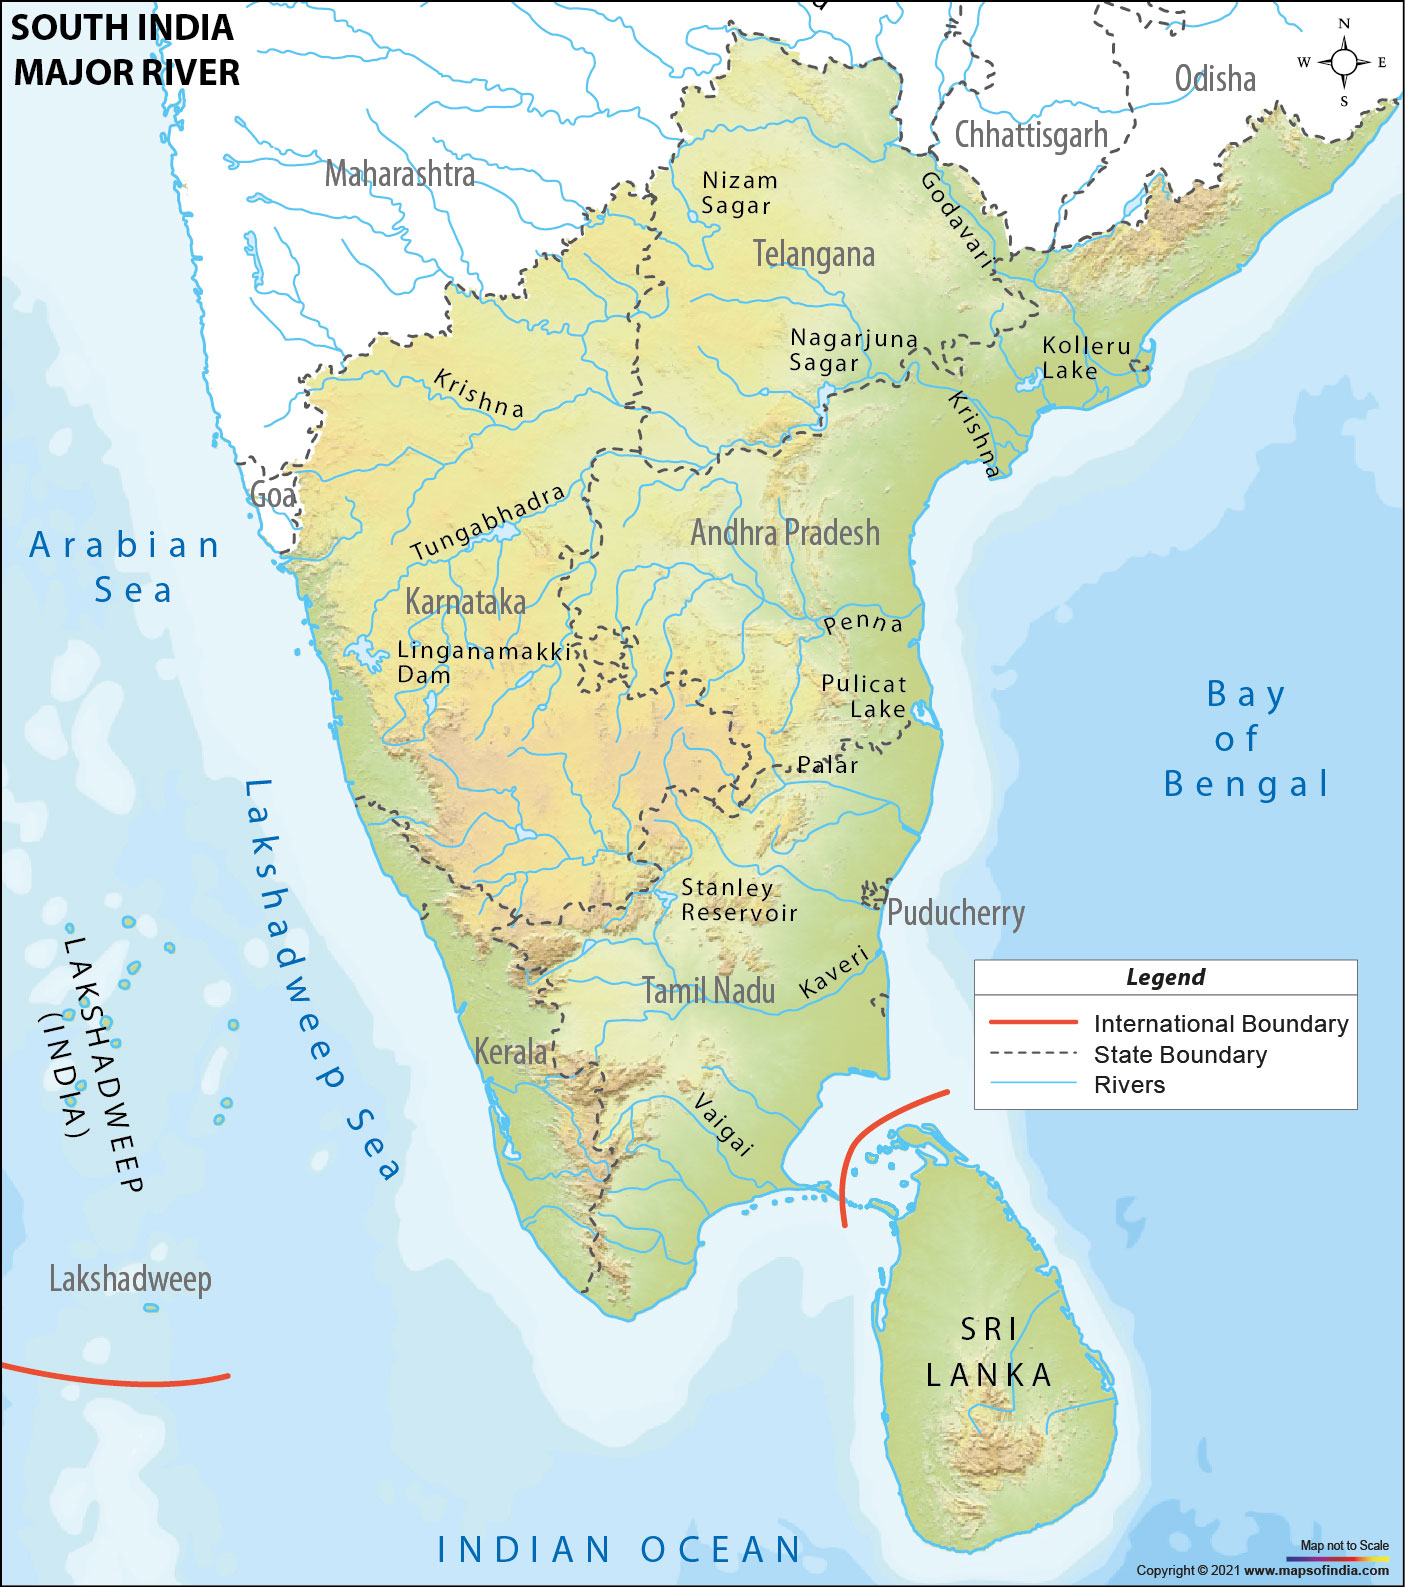 River Network of South India